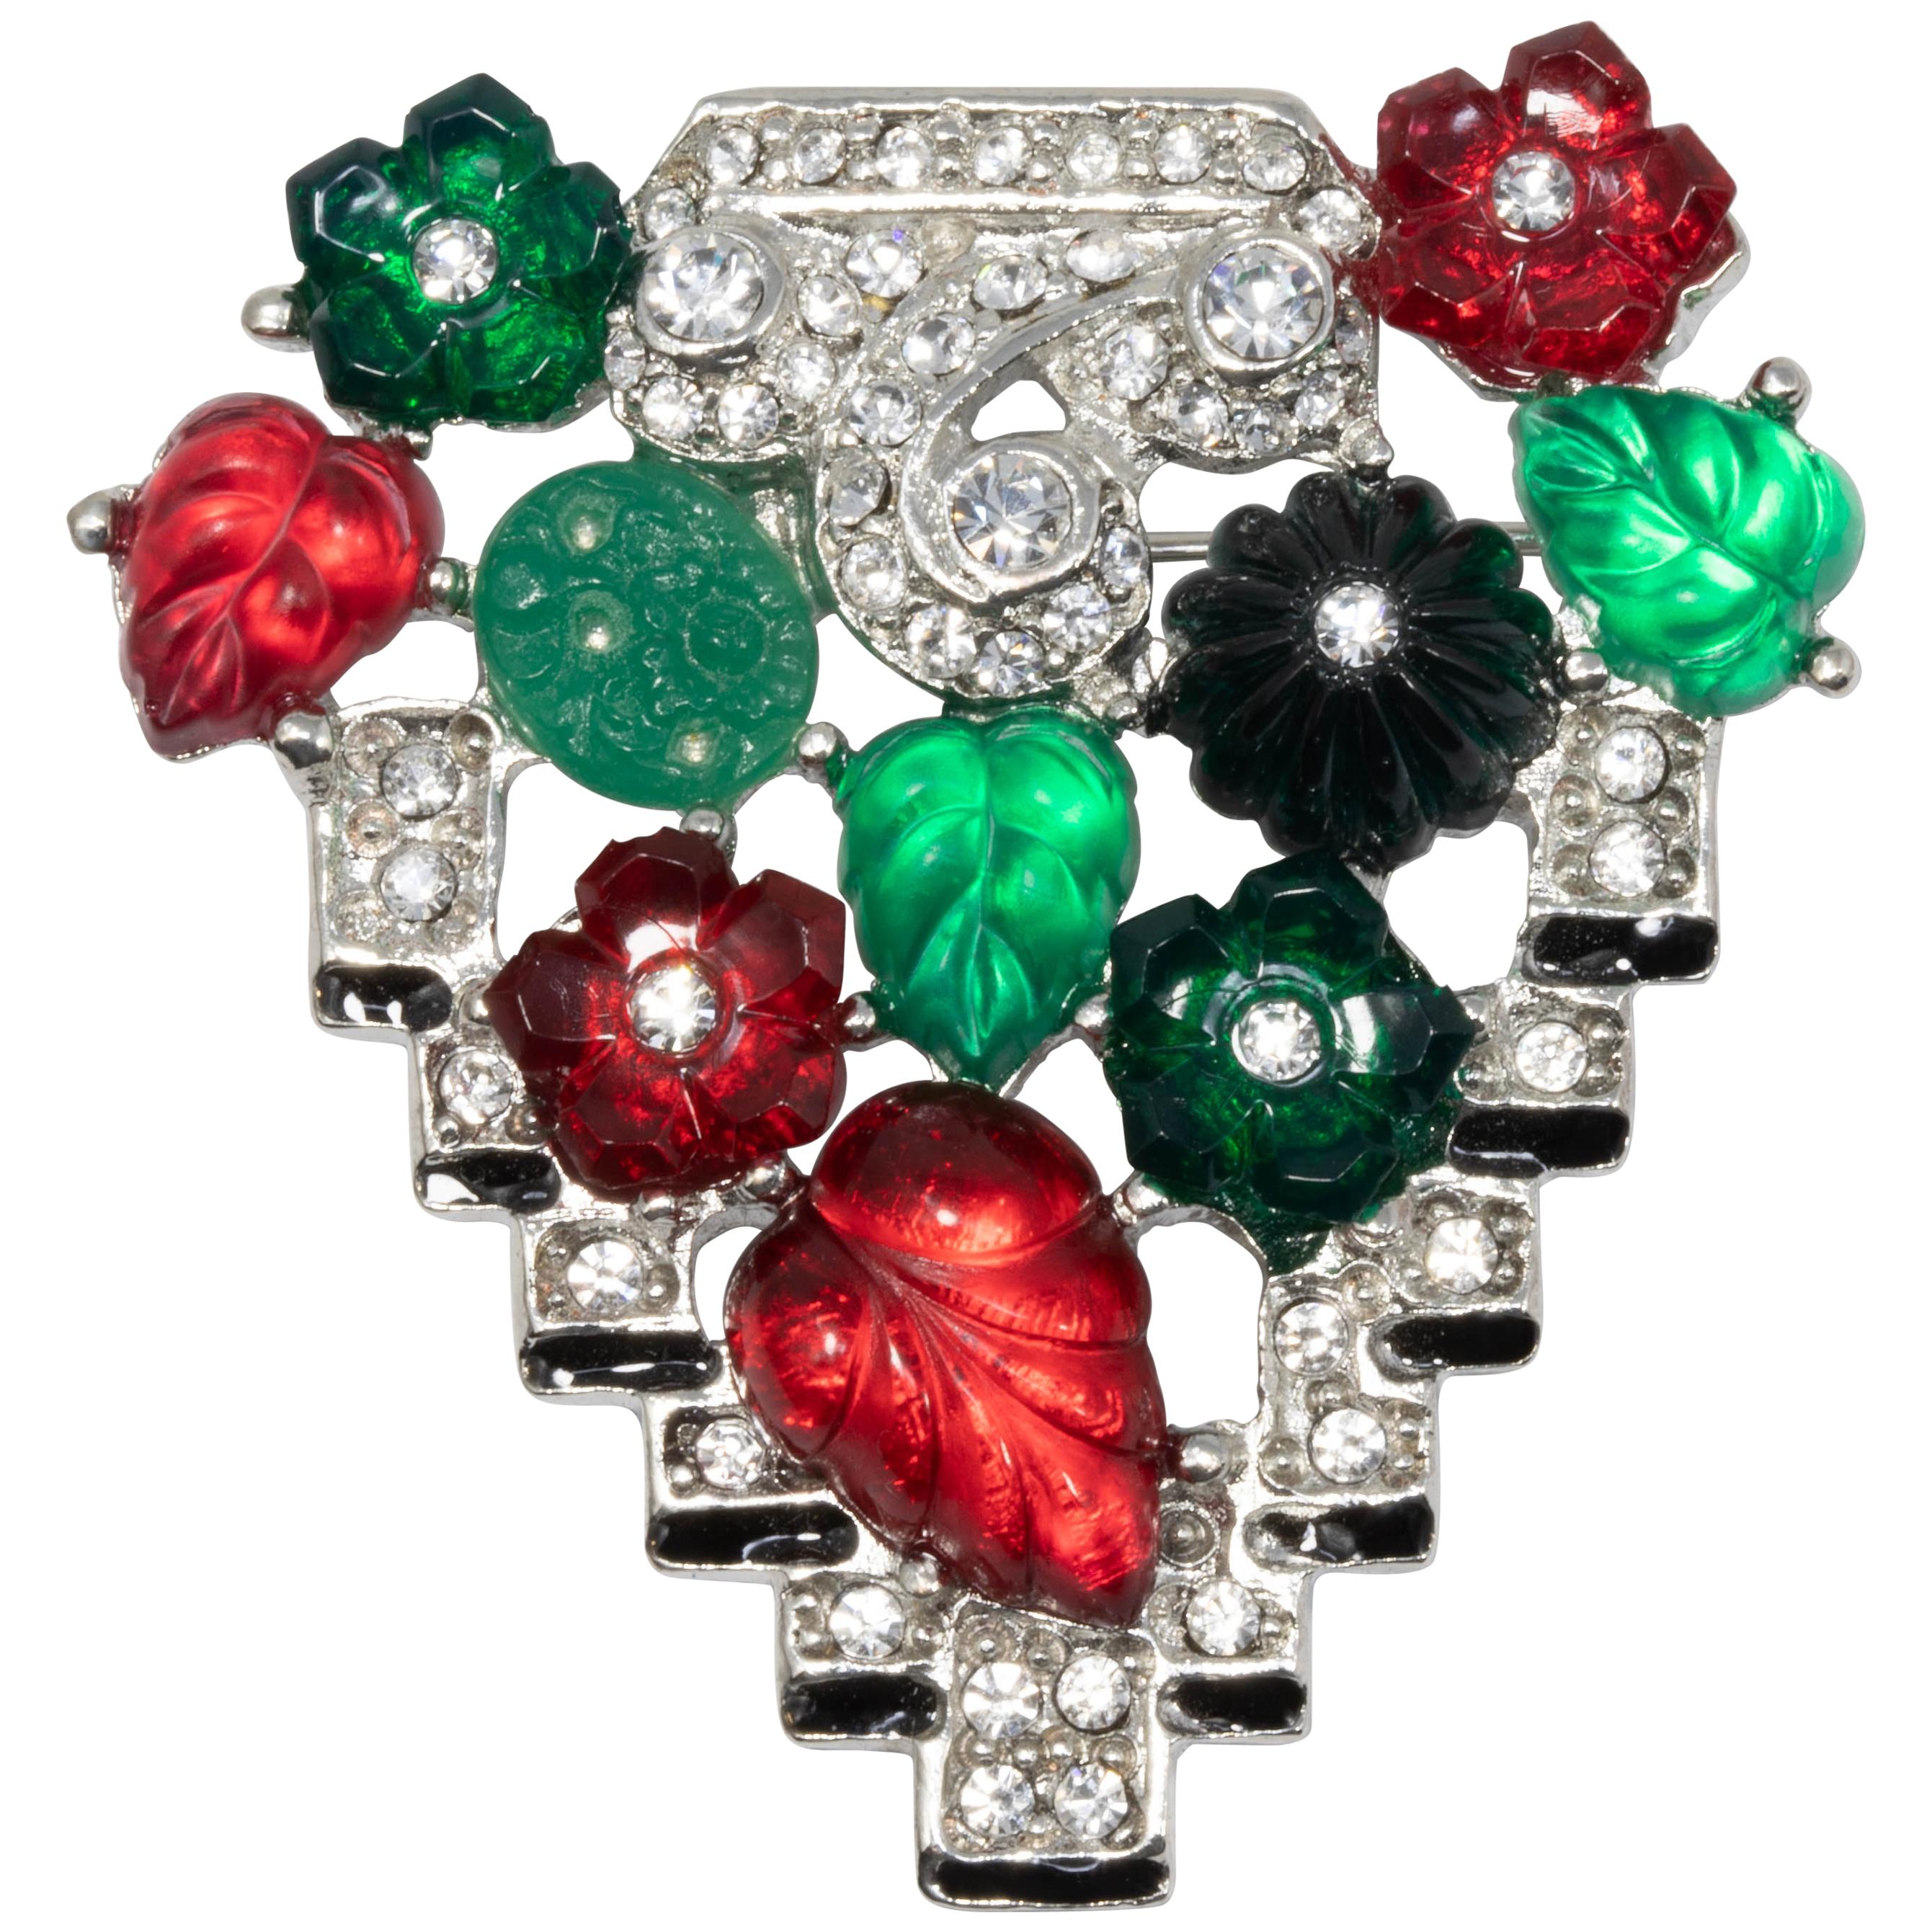 KJL Tutti Frutti Art Deco Fruit Pin Brooch with Clear Crystals, Rhodium Plated